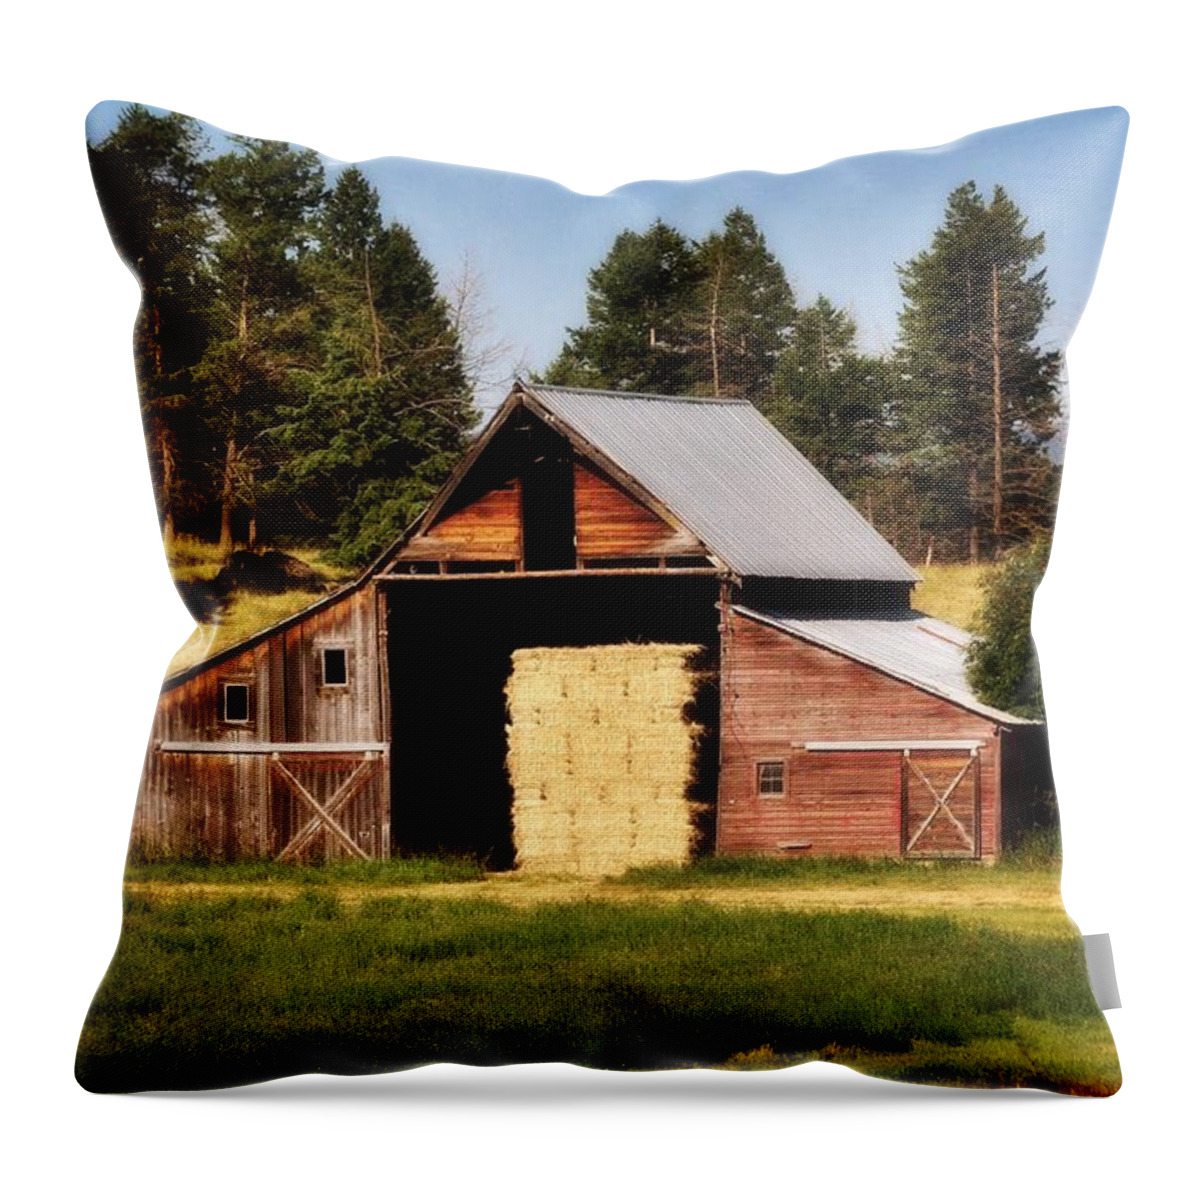 Barn Throw Pillow featuring the photograph Whitefish Barn by Marty Koch